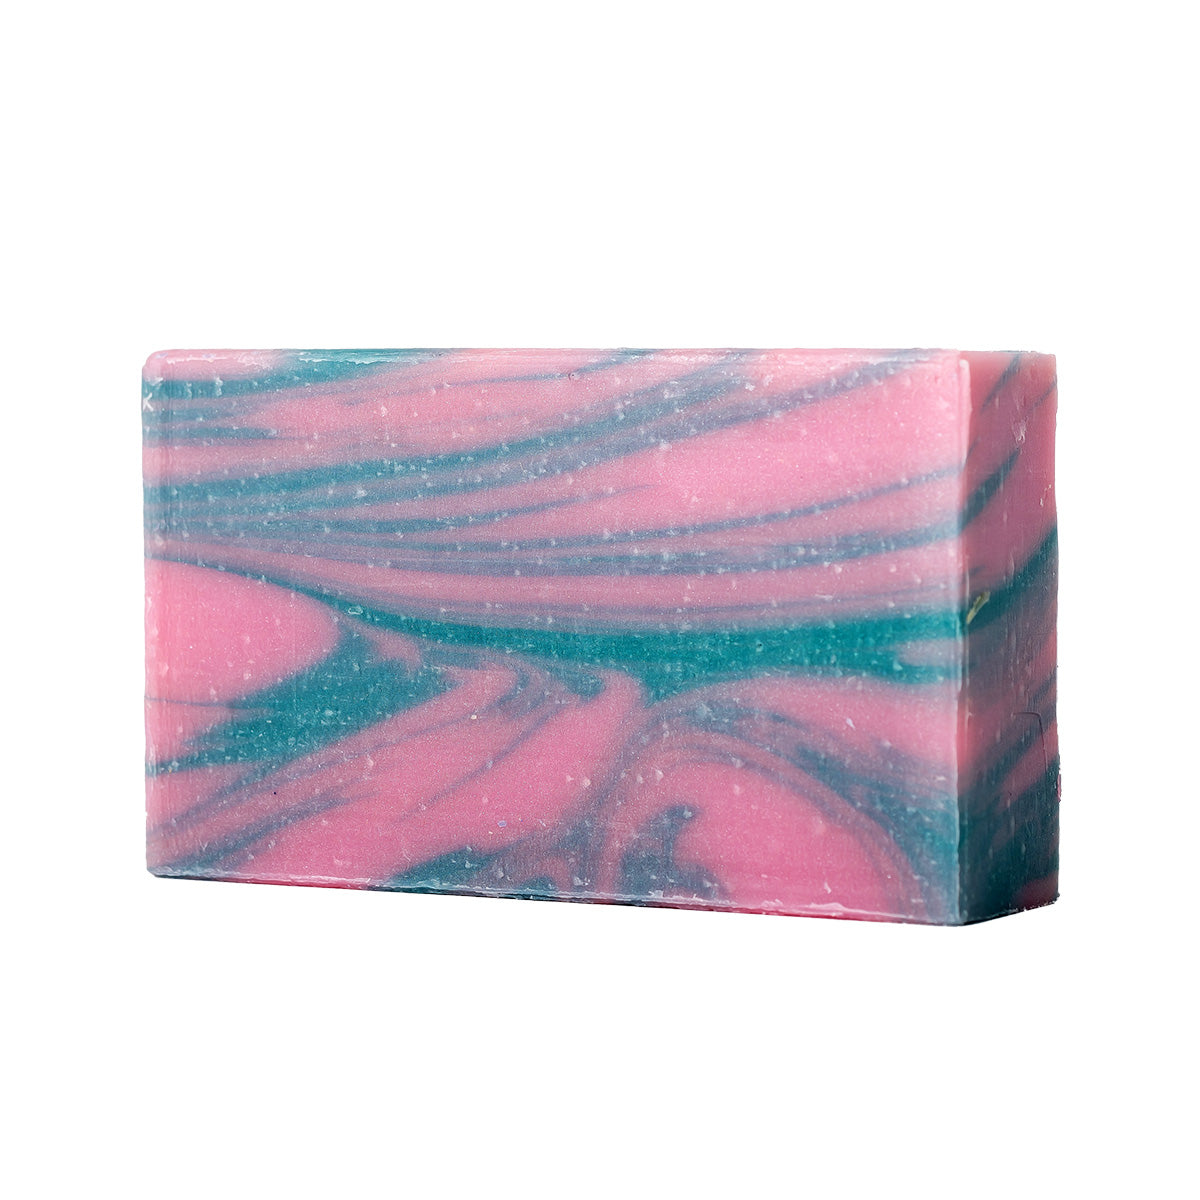 Coconut Milk Soap Counter Display with fill